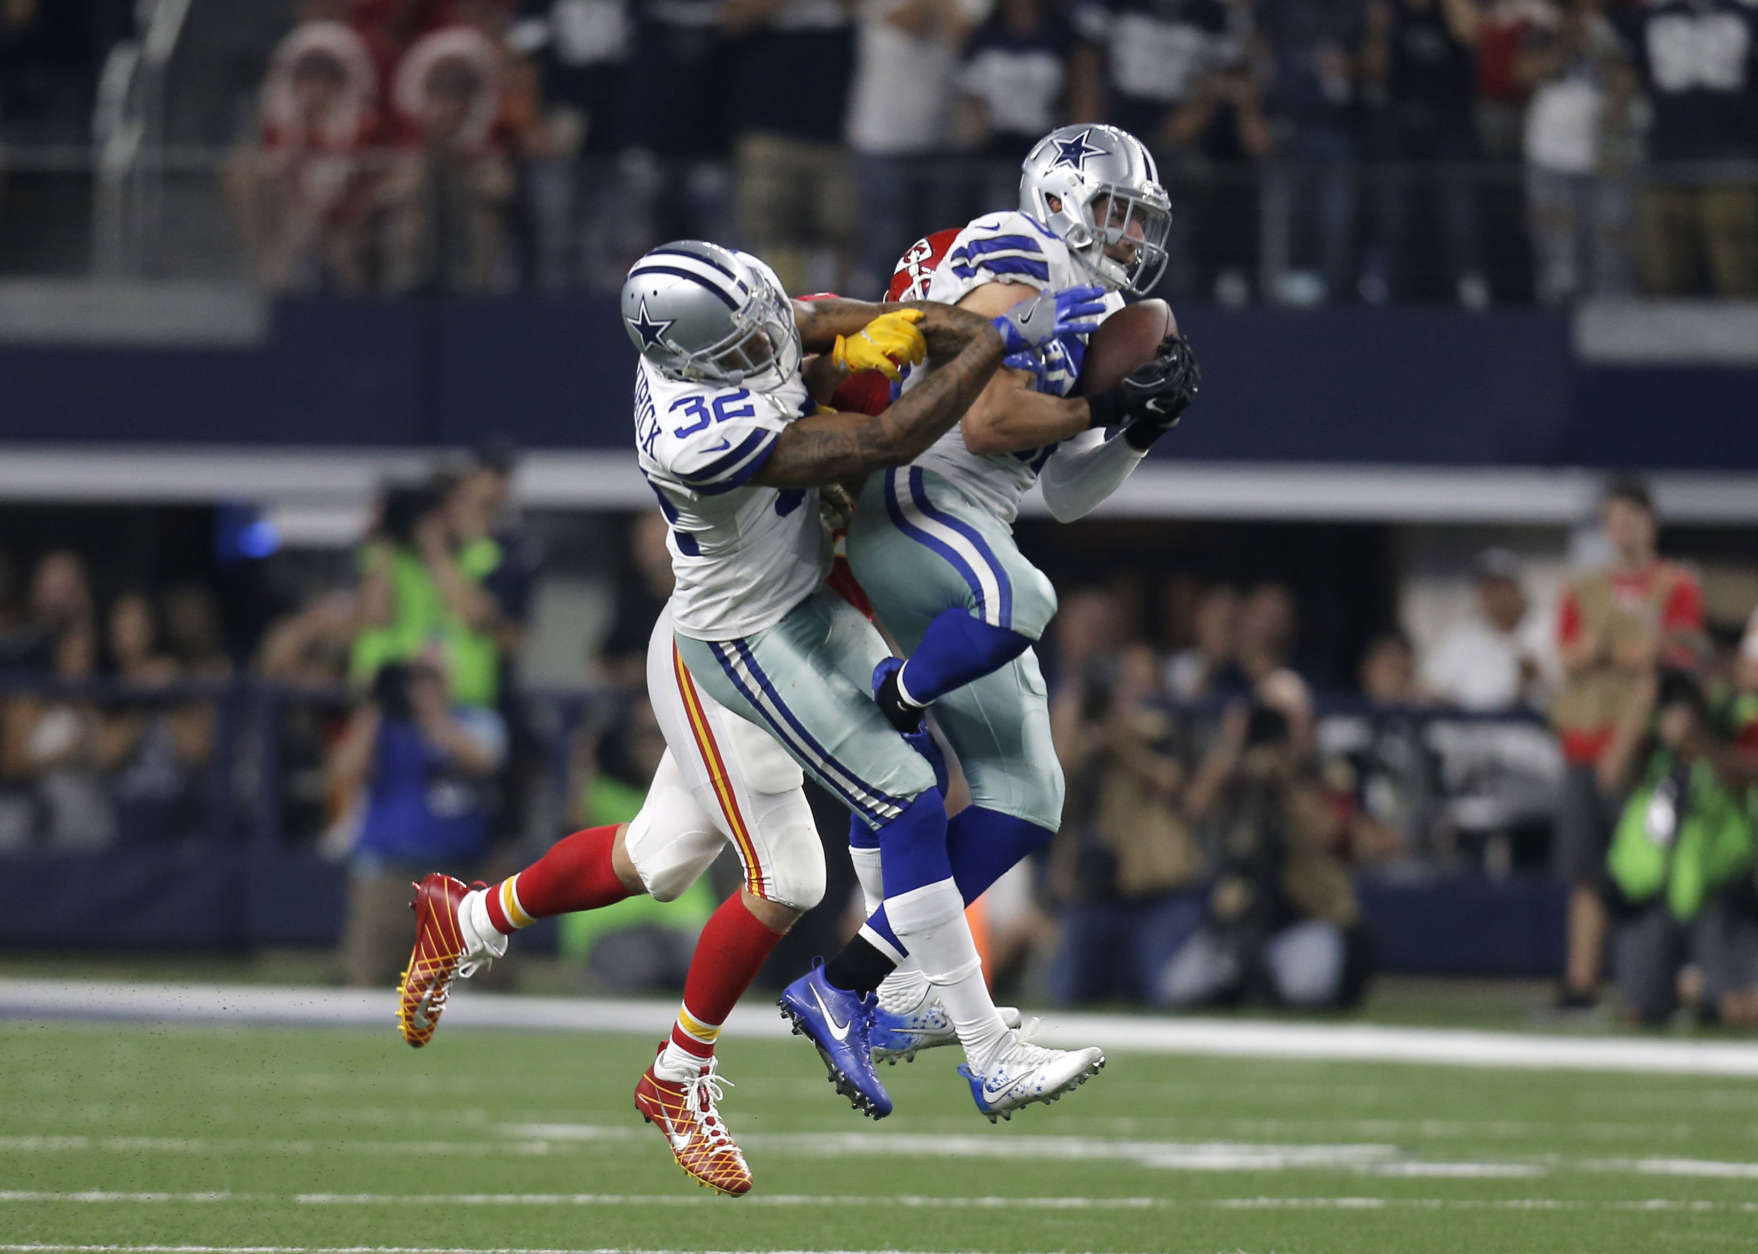 Dallas Cowboys safety Jeff Heath (38) intercepts a pass in front of Orlando Scandrick (32) intended for Kansas City Chiefs tight end Travis Kelce, rear, in the second half of an NFL football game, Sunday, Nov. 5, 2017, in Arlington, Texas. (AP Photo/Brandon Wade)